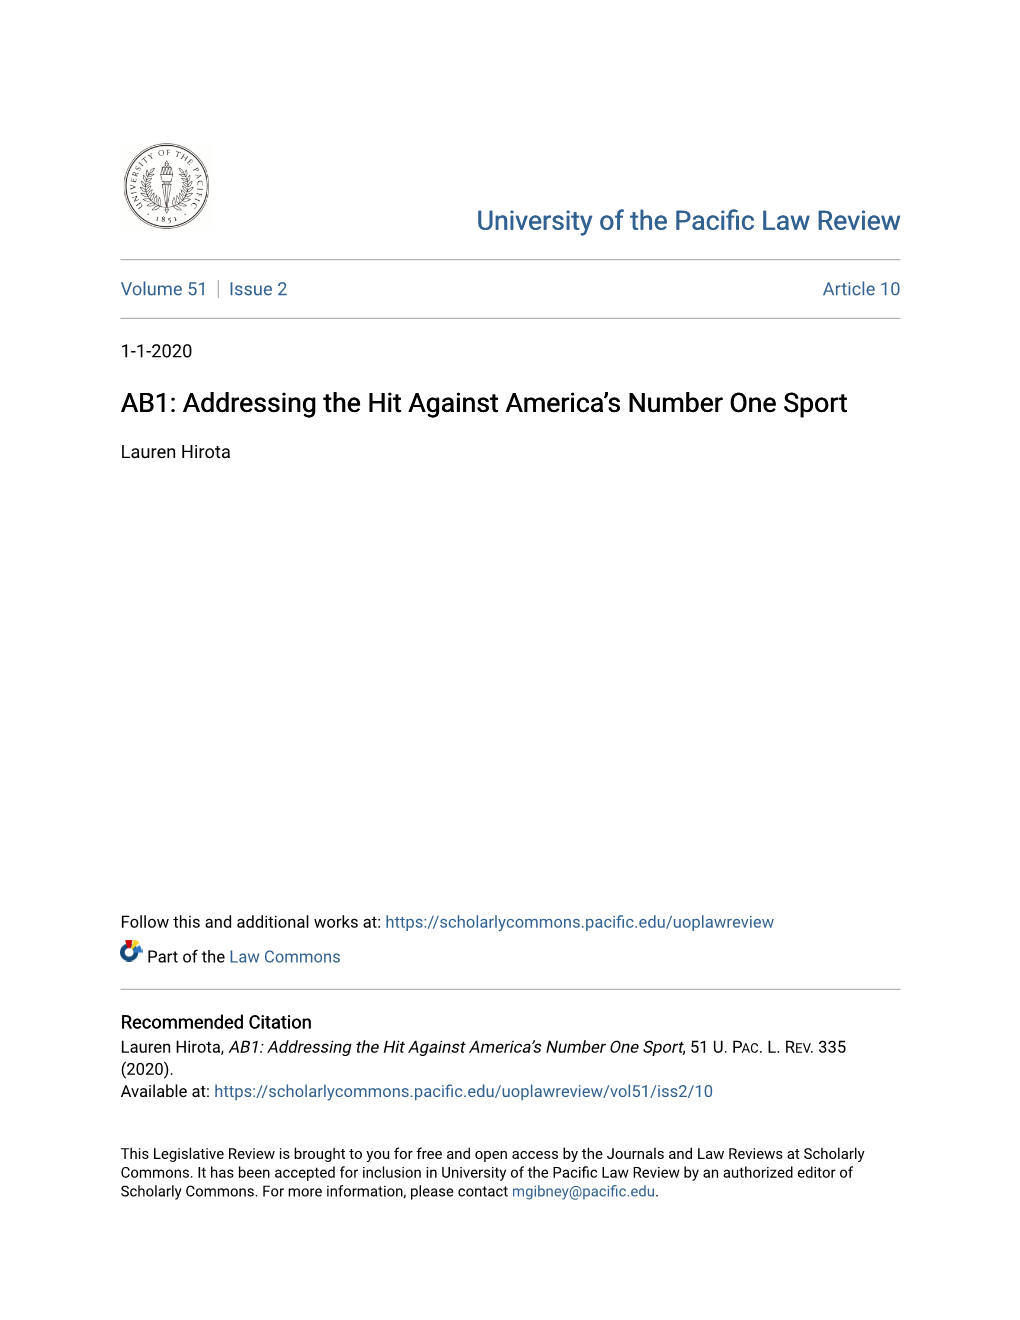 AB1: Addressing the Hit Against America's Number One Sport